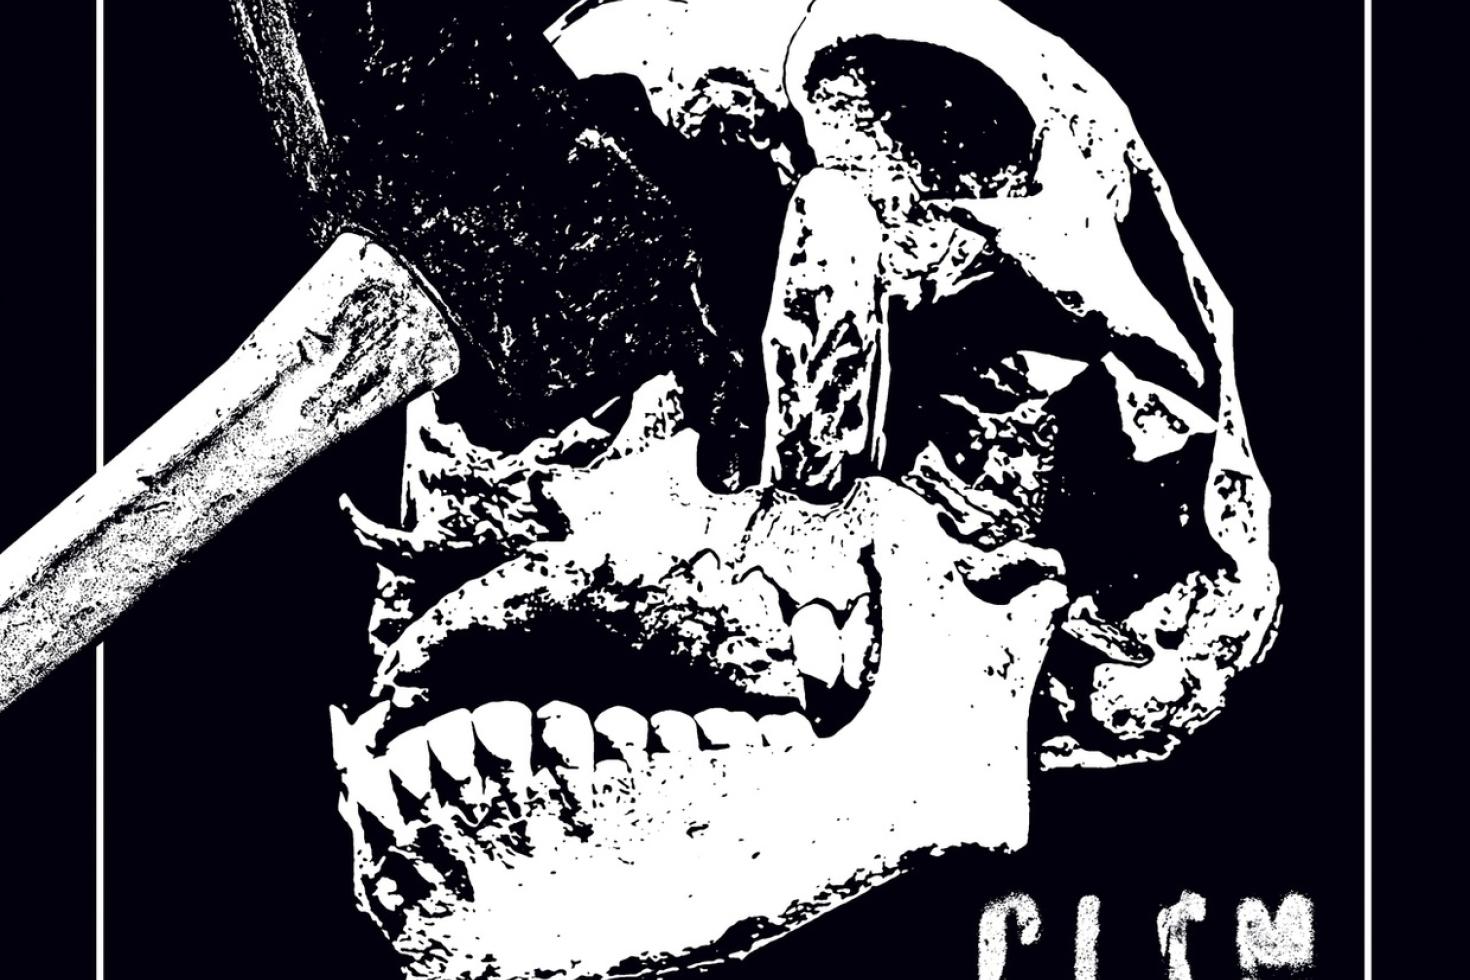 C.L.S.M. (aka Coliseum) release video for 'Hammer Through The Windshield' off surprise album